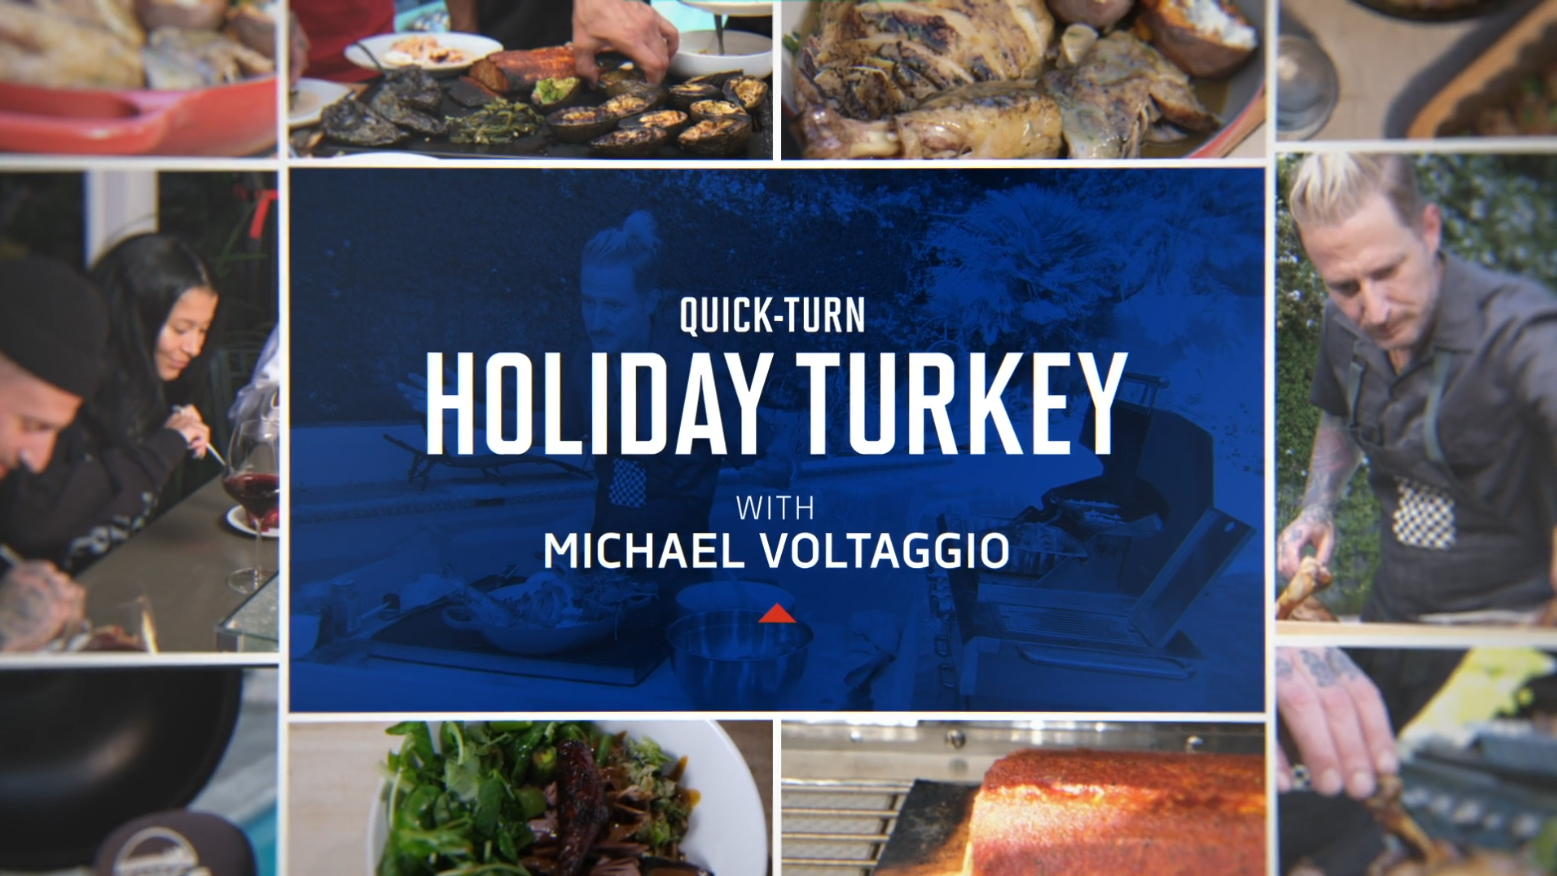 Top Chef Reality Star michael voltaggio makes PERC video to show quick and easy way to cook turkey On Propane grill in half time